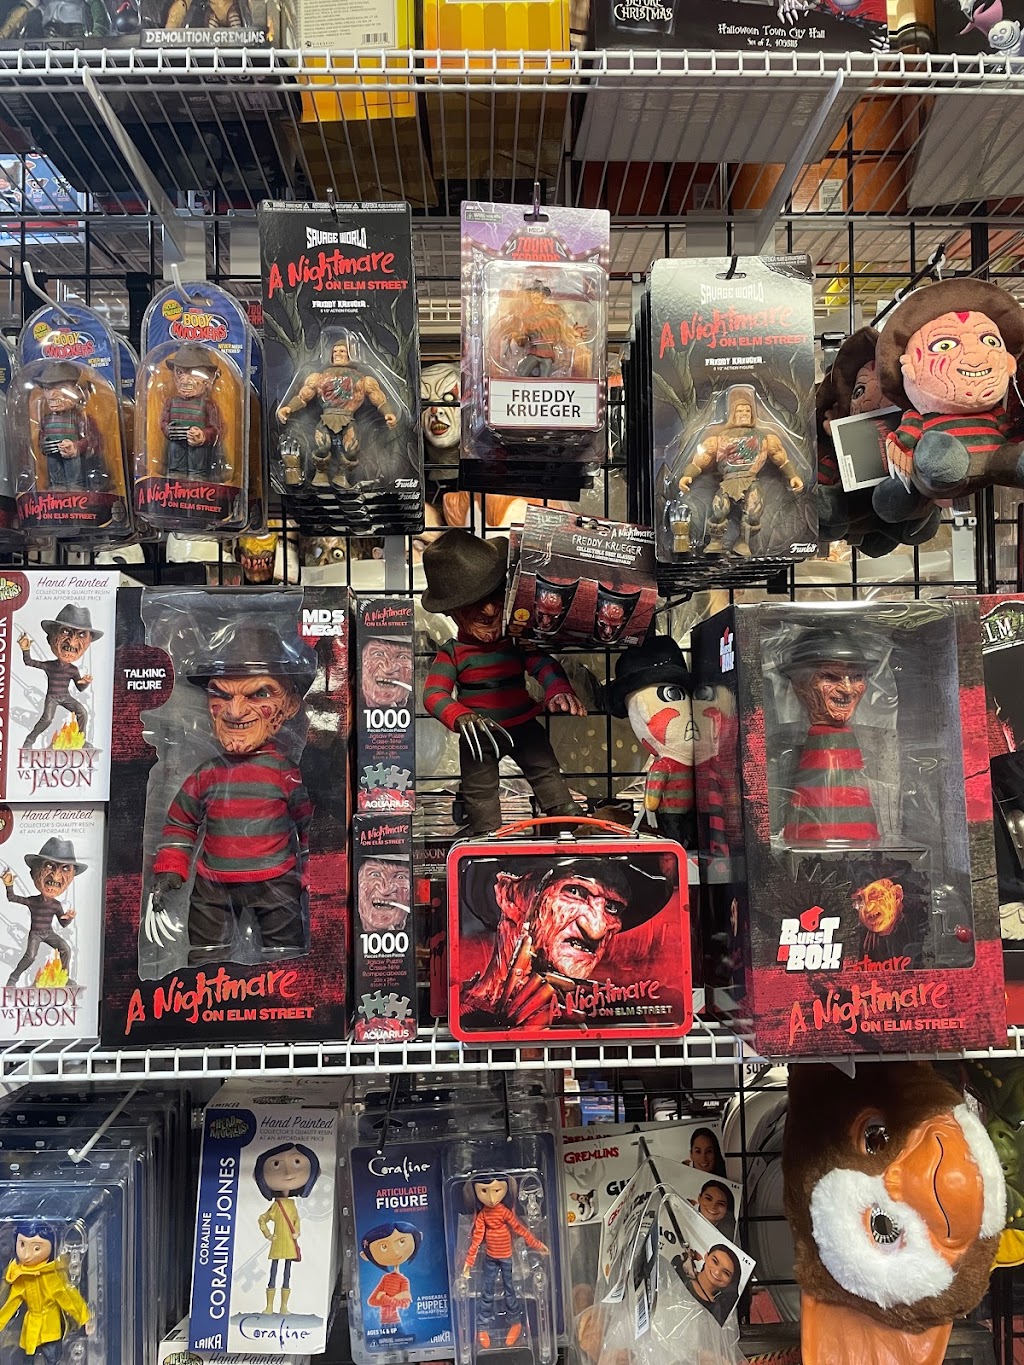 ScarePros Halloween, Horror Toys & Collectibles | 8520 New Falls Rd showroom a, Levittown, PA 19054 | Phone: (215) 547-1906